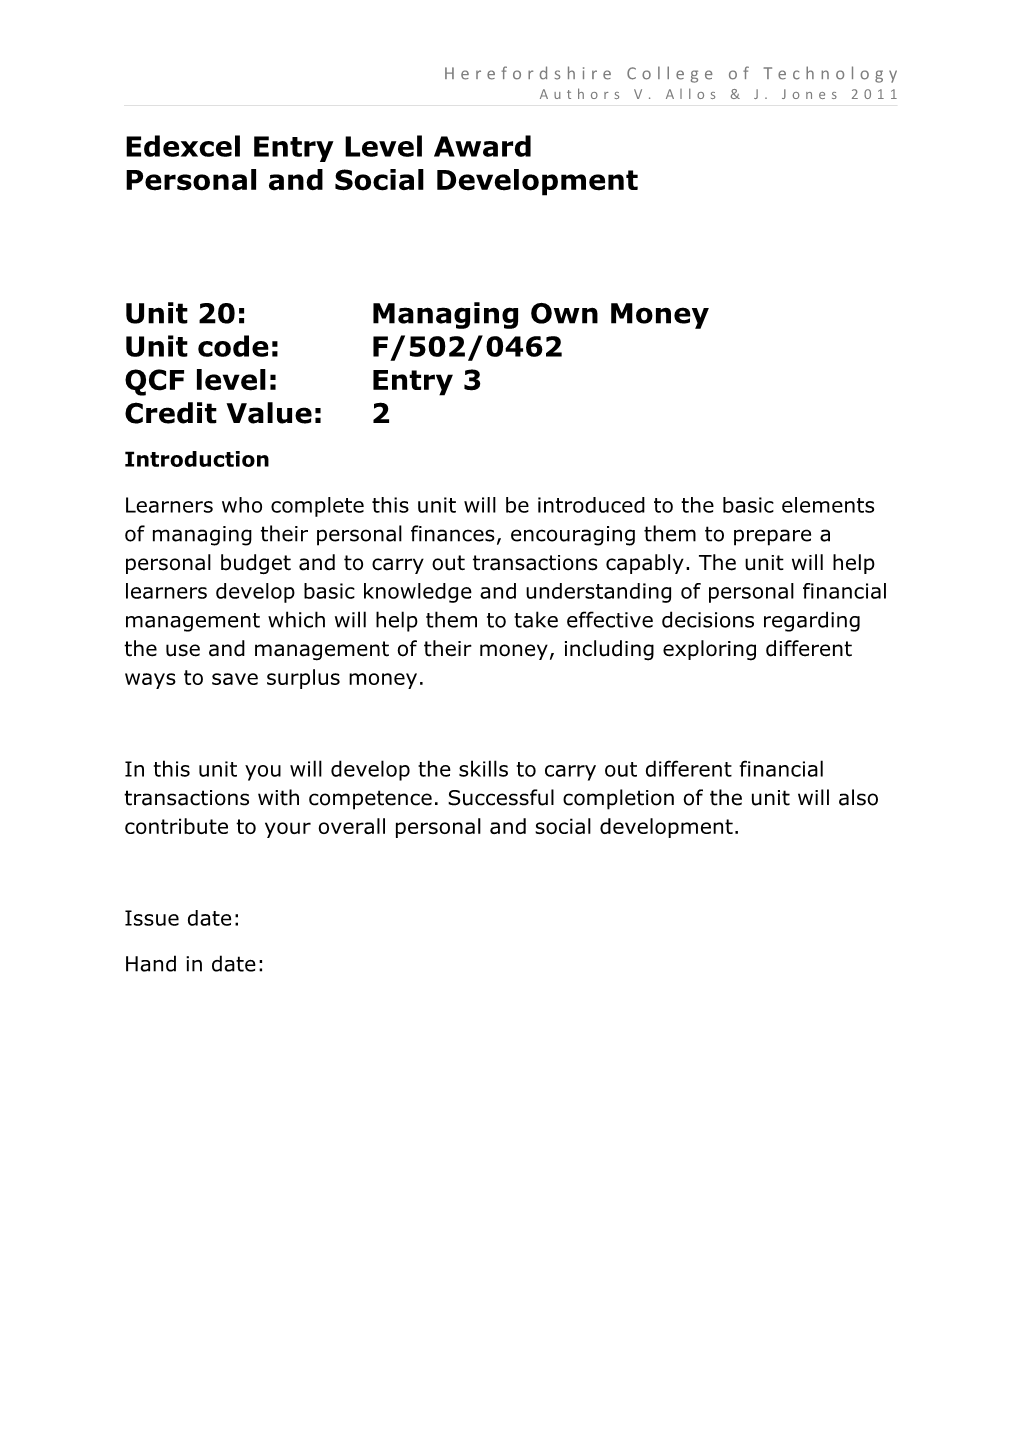 Unit 20 - Managing Own Money - Herefordshire College of Technology